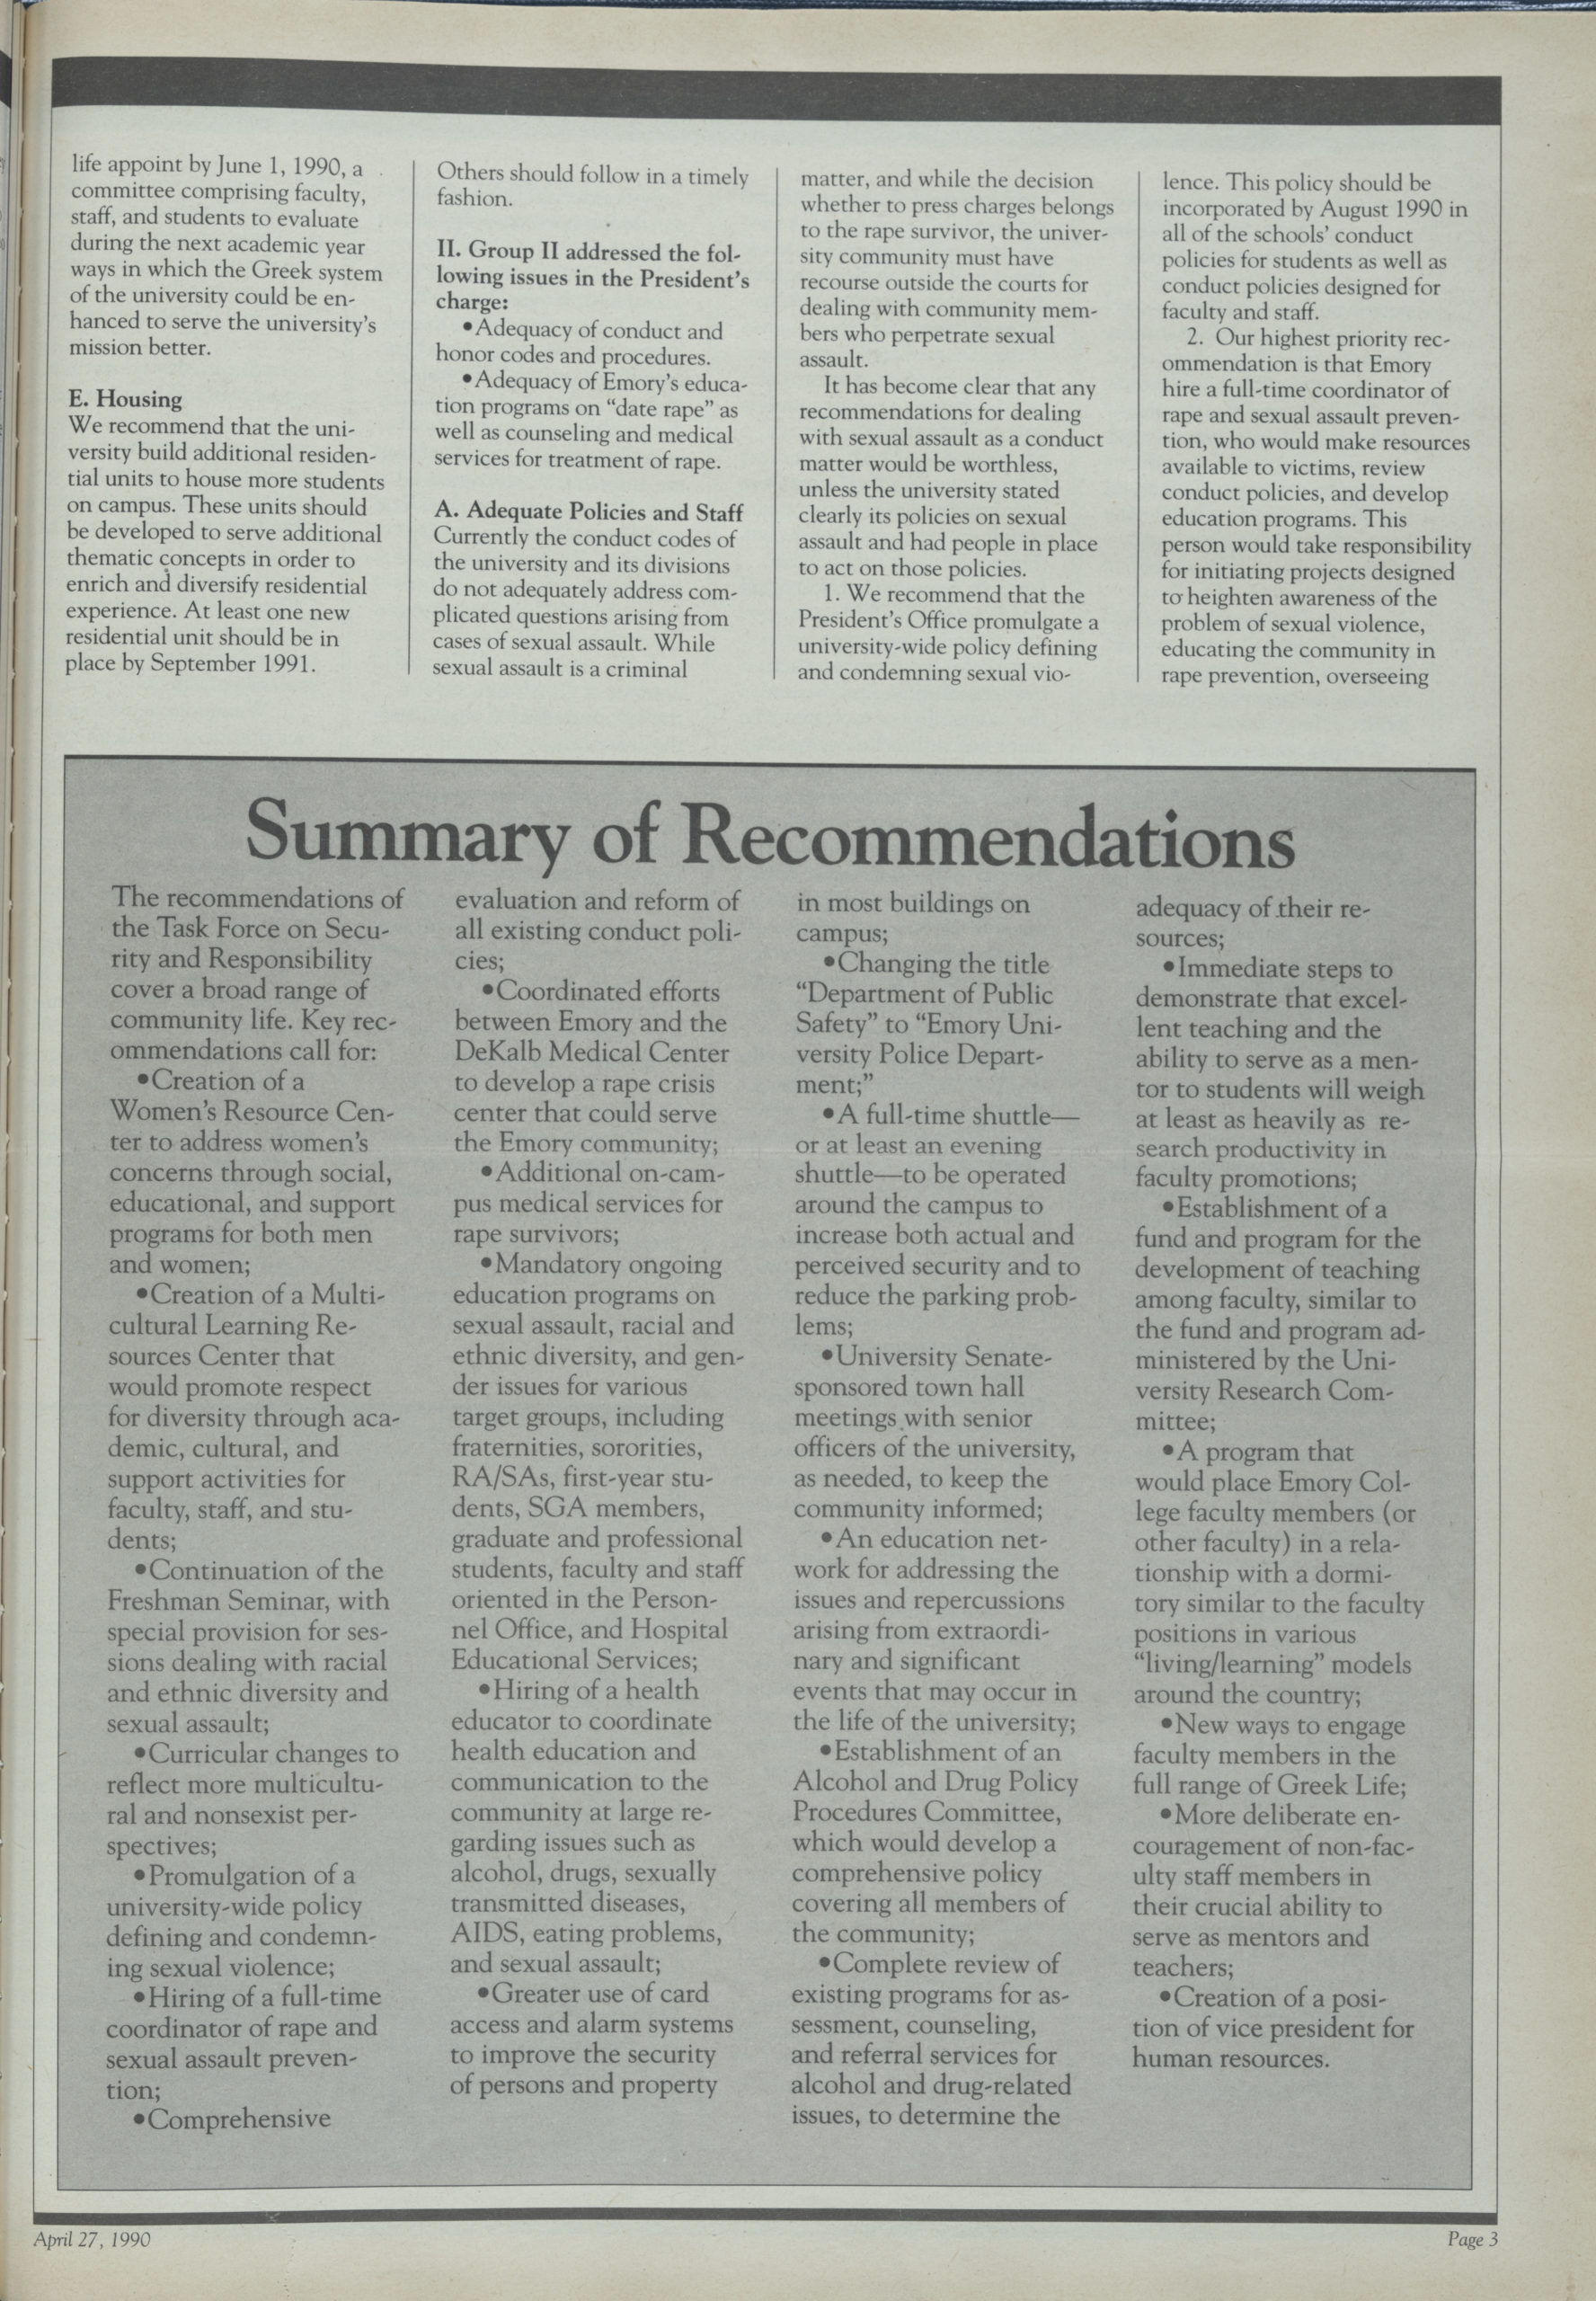 Typed report on campus community with recommendations (pg 3 of 7)